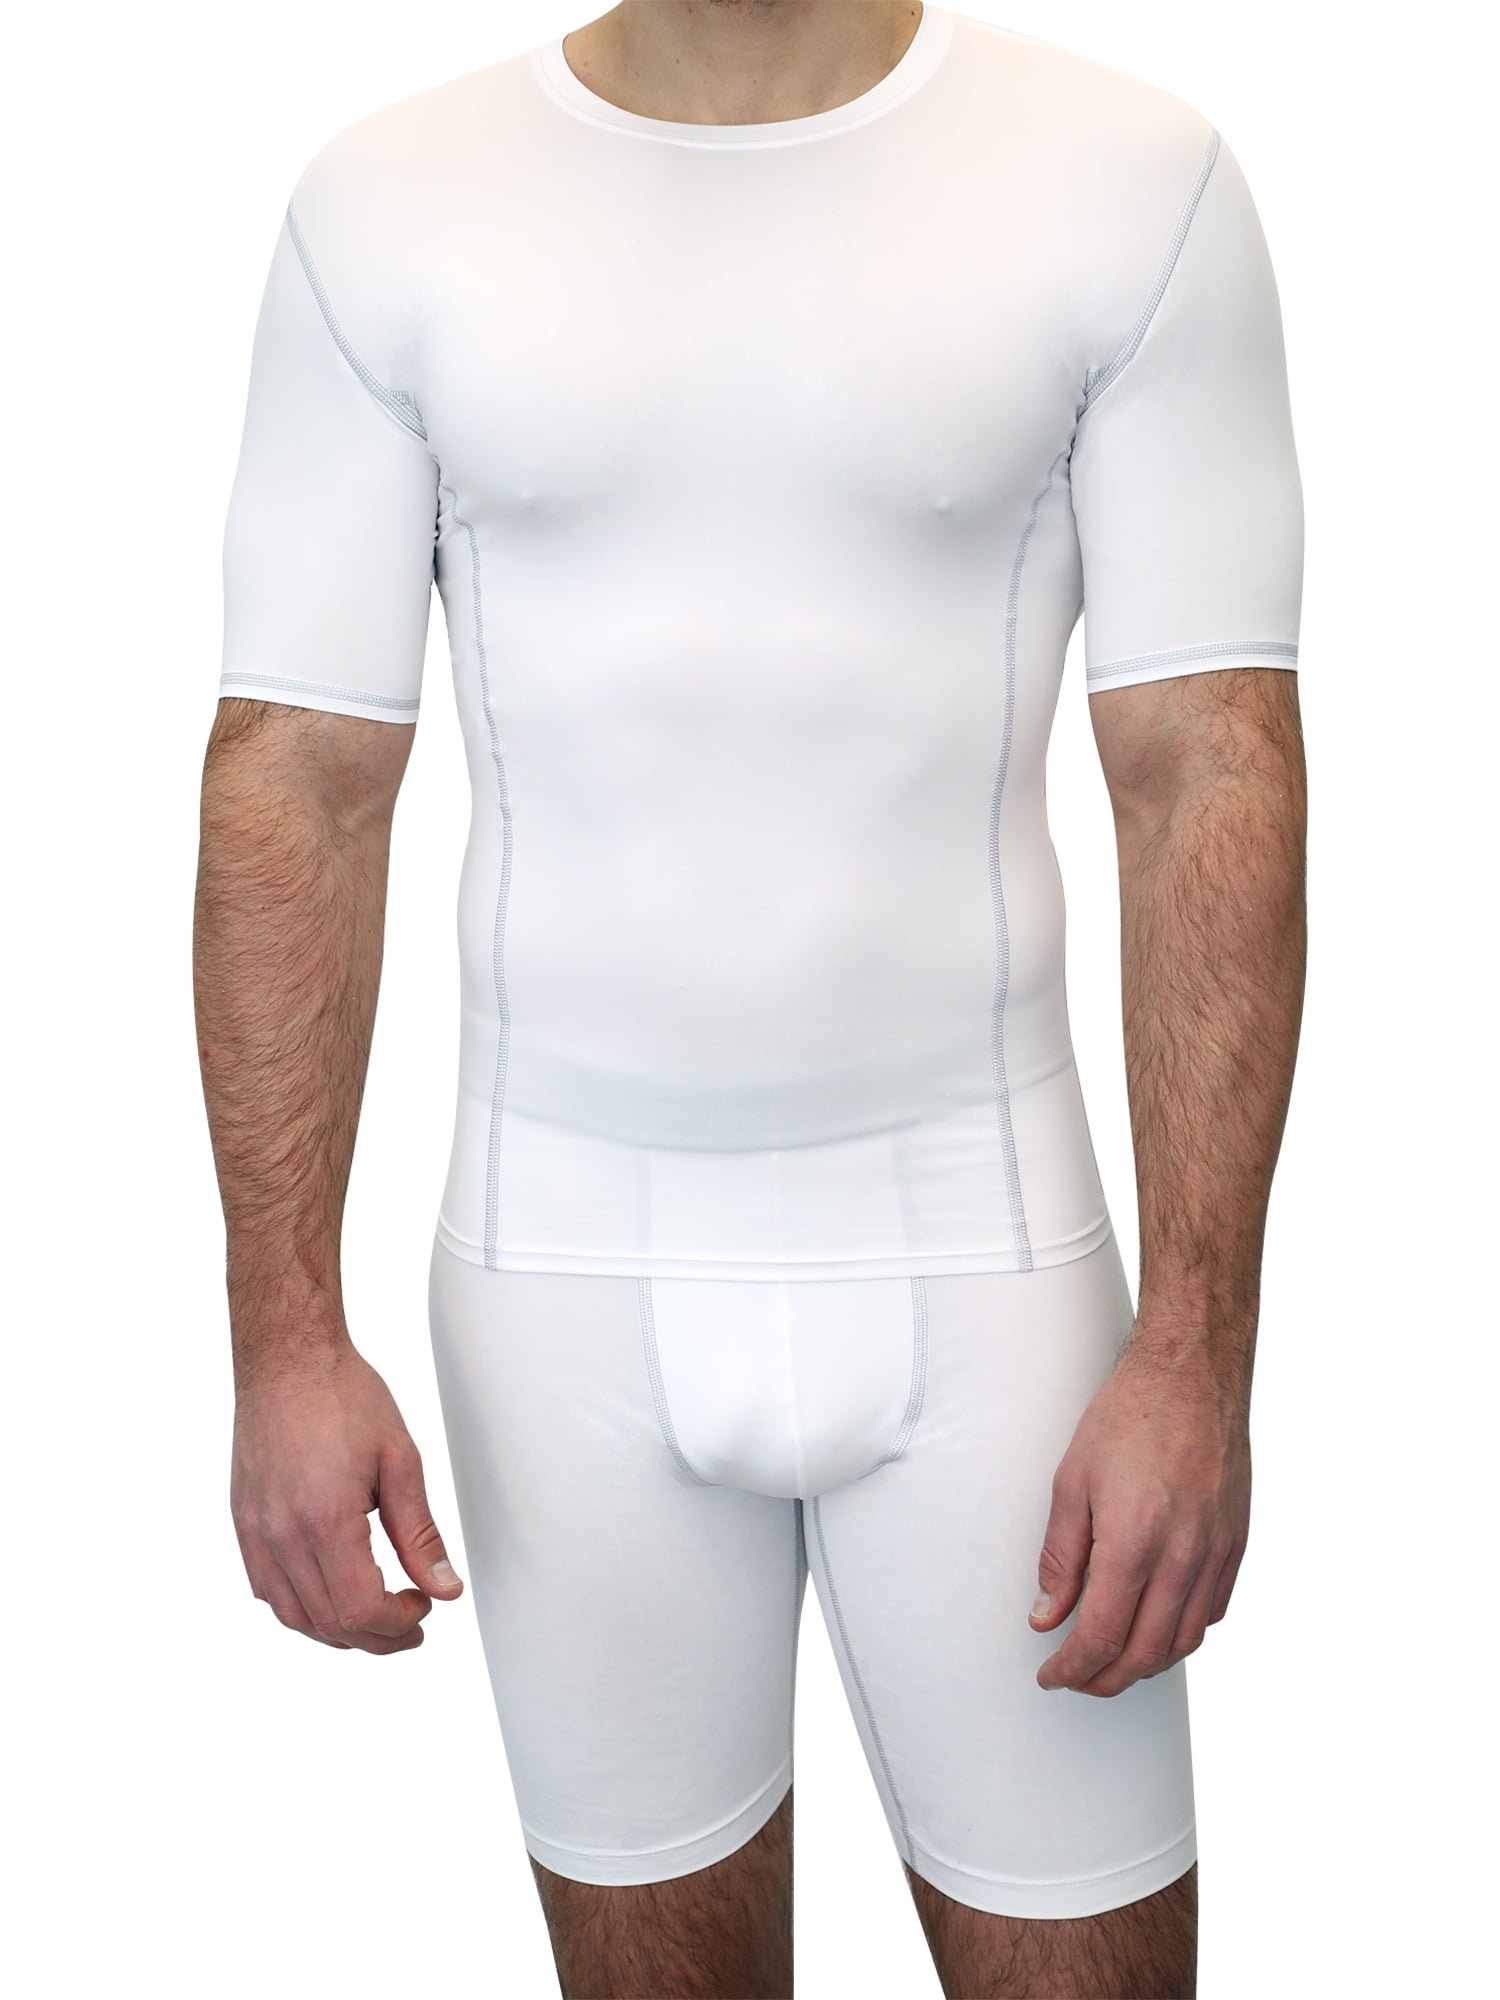 McDavid Sport Compression Shirt with Short Sleeves, White, Adult Small